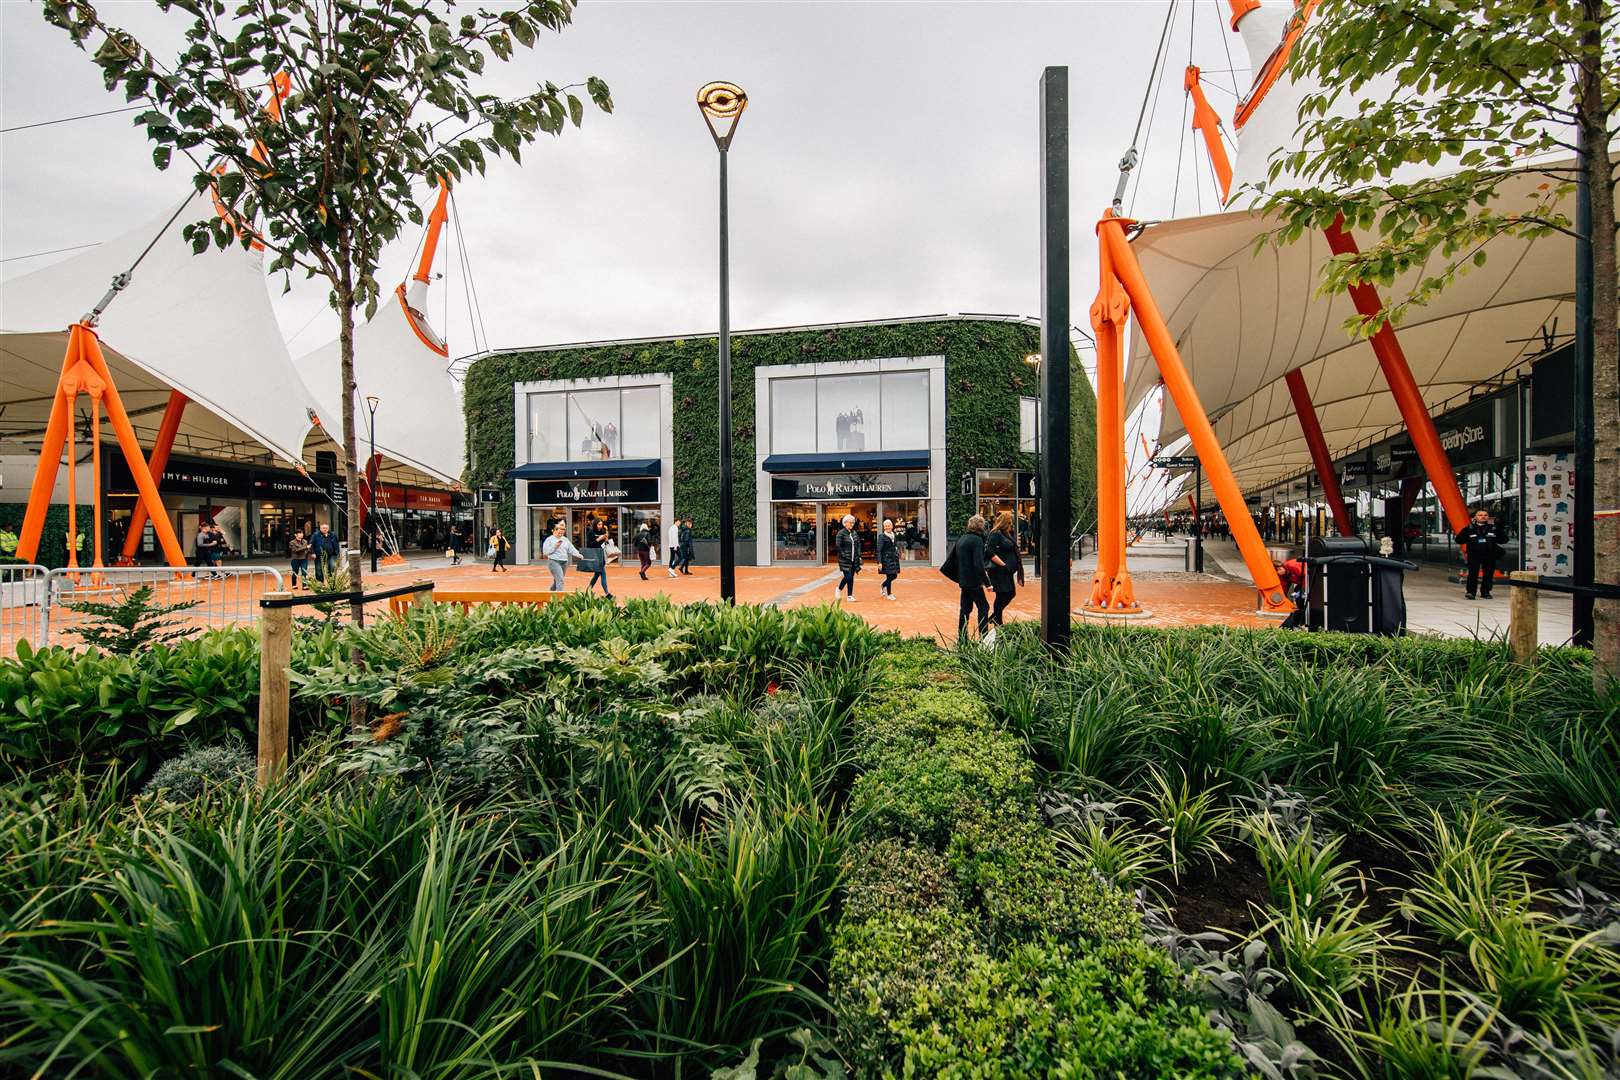 Every Ashford Designer Outlet unit will close by 6pm nightly.